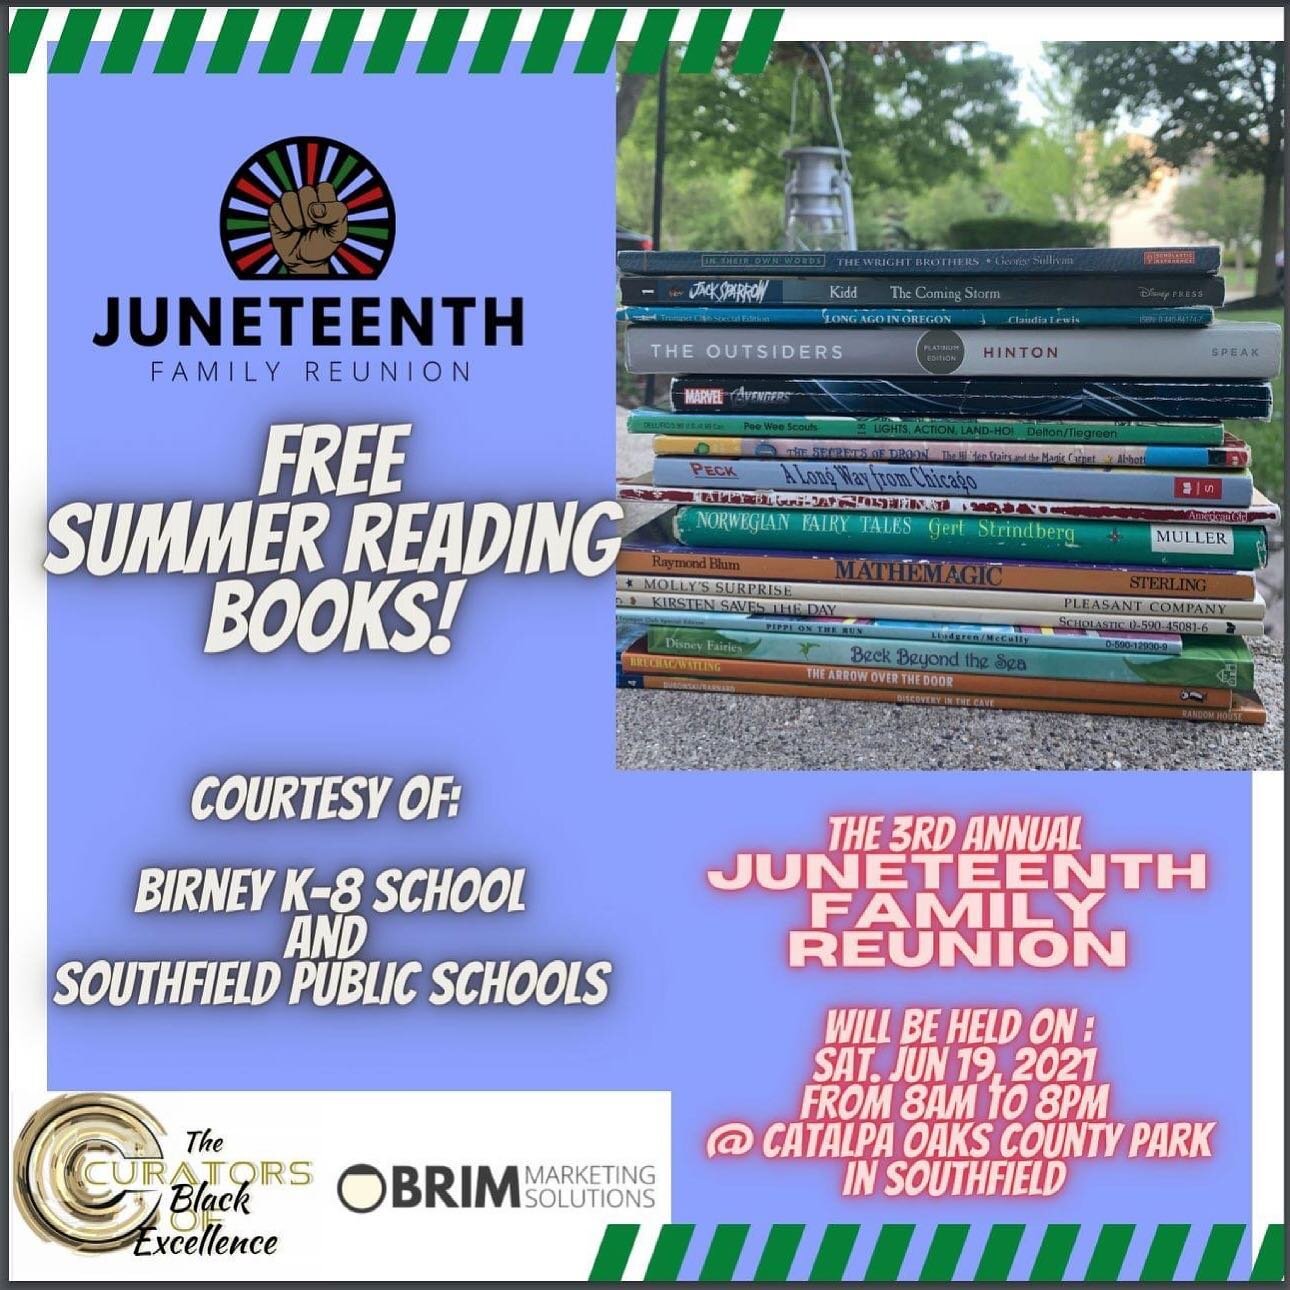 FREE!!!- Summer Reading Books this year at the 3rd Annual Juneteenth Family Reunion !!!!

Big Shout Outs to Alice M. Birney K-8 School and Southfield Public Schools for their generous donation and their dedication to educating our community even in t